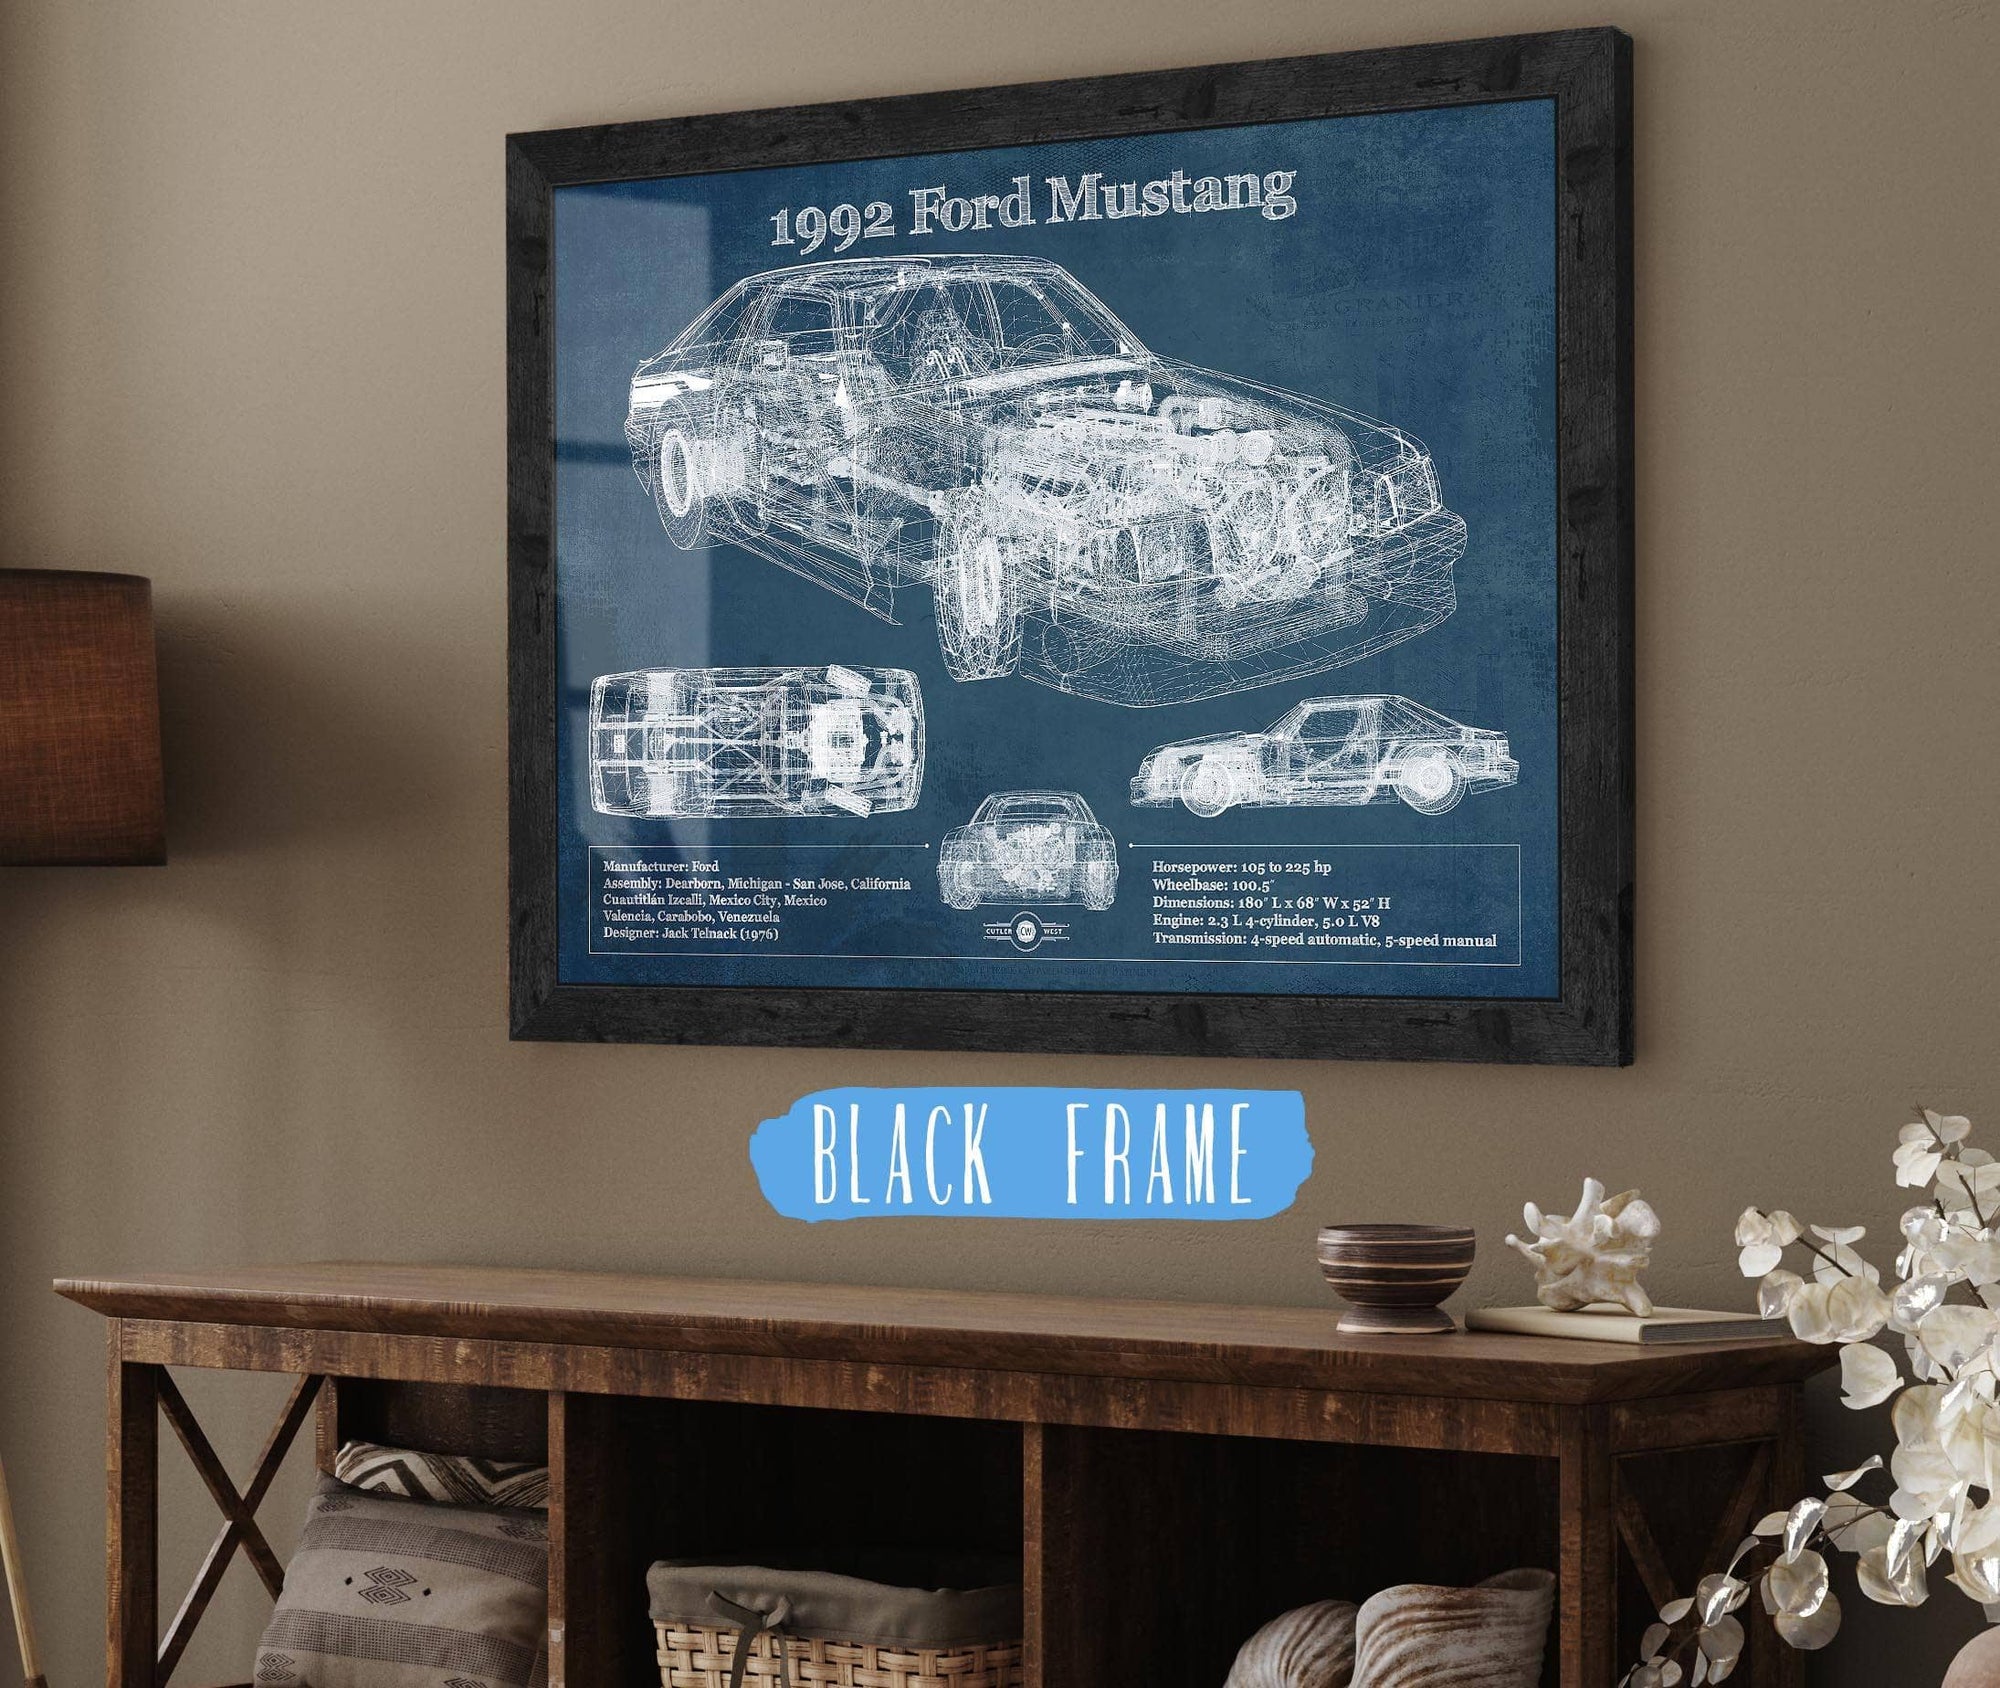 Cutler West Ford Collection 1992 Ford Mustang Fox body - Big Block Ford Twin Turbo Drag Car Original Blueprint Art